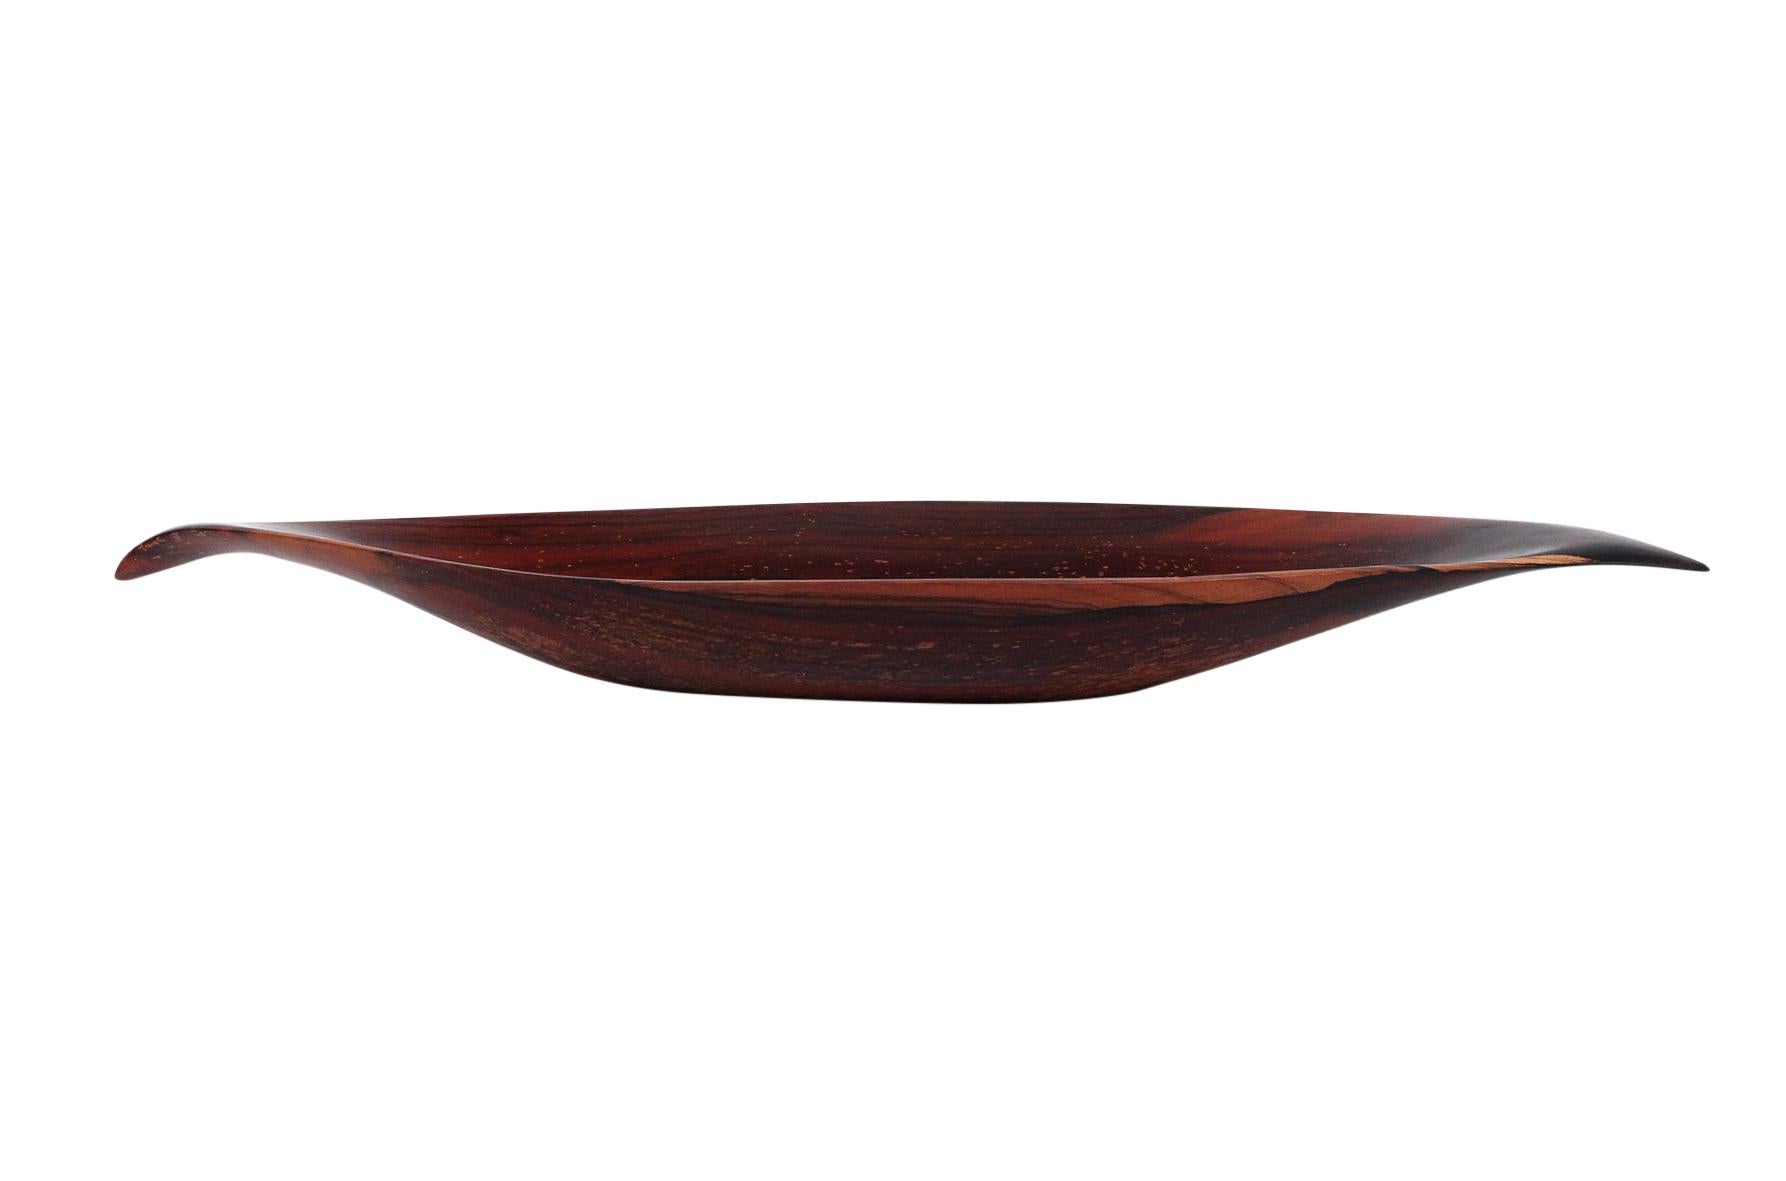 Impressive sculptural bowl in rosewood by Emil Milan known as “Emilan”. This is one the largest bowl forms to have come to market at 3ft long. Milan was an American woodworker known for his bowls and carved sculptures. He trained at the Arts Student